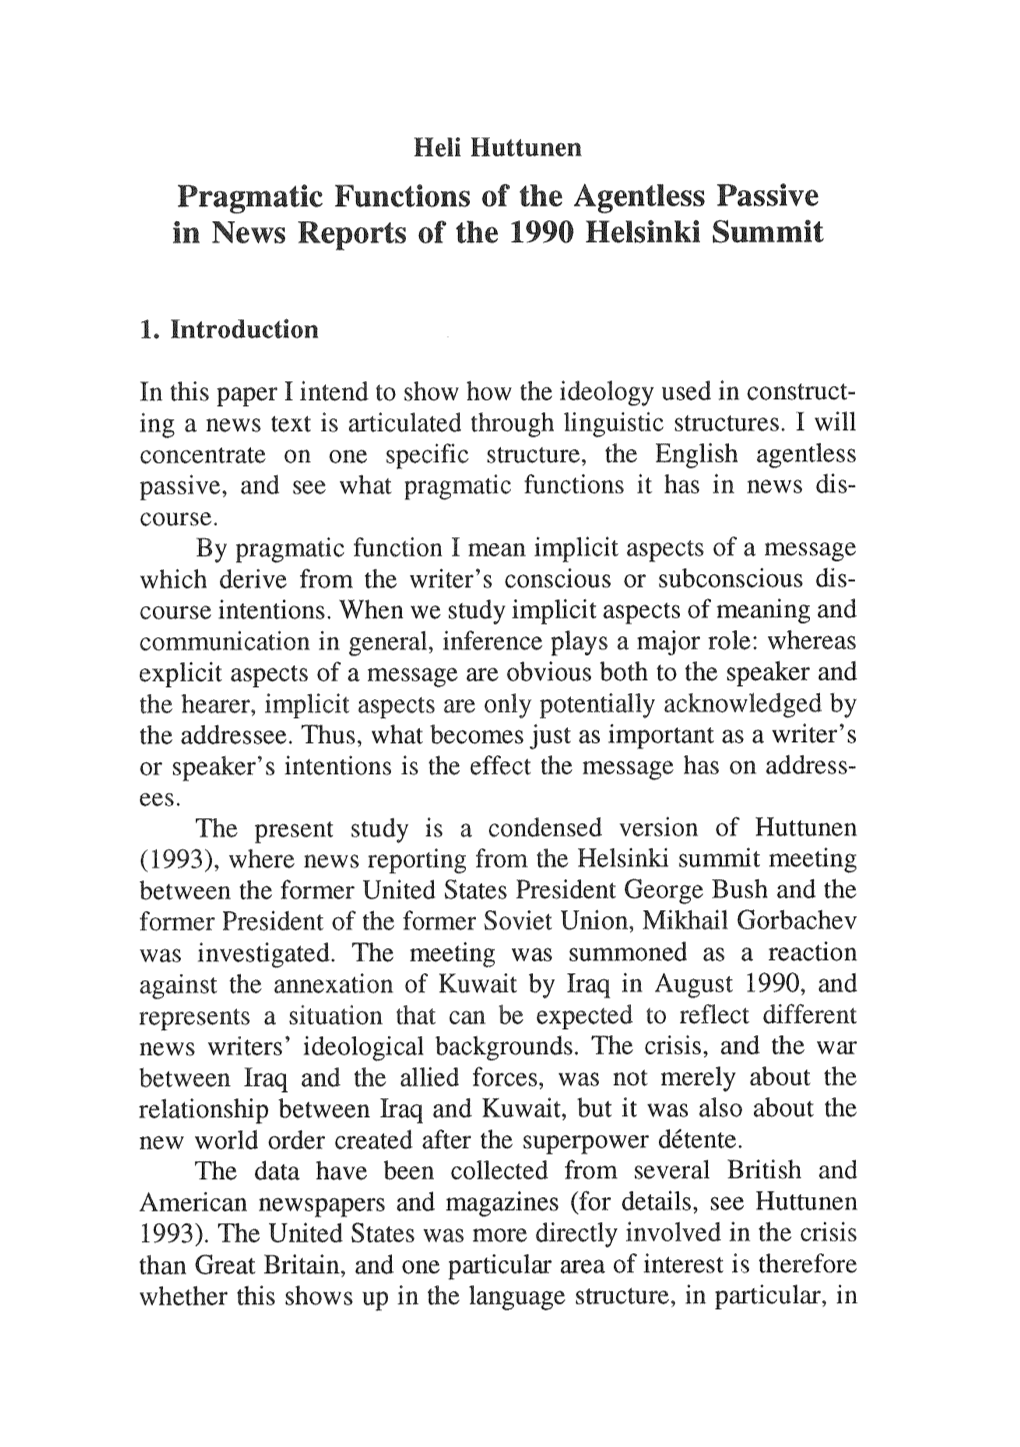 In News Reports of the 1990 Helsinki Summit